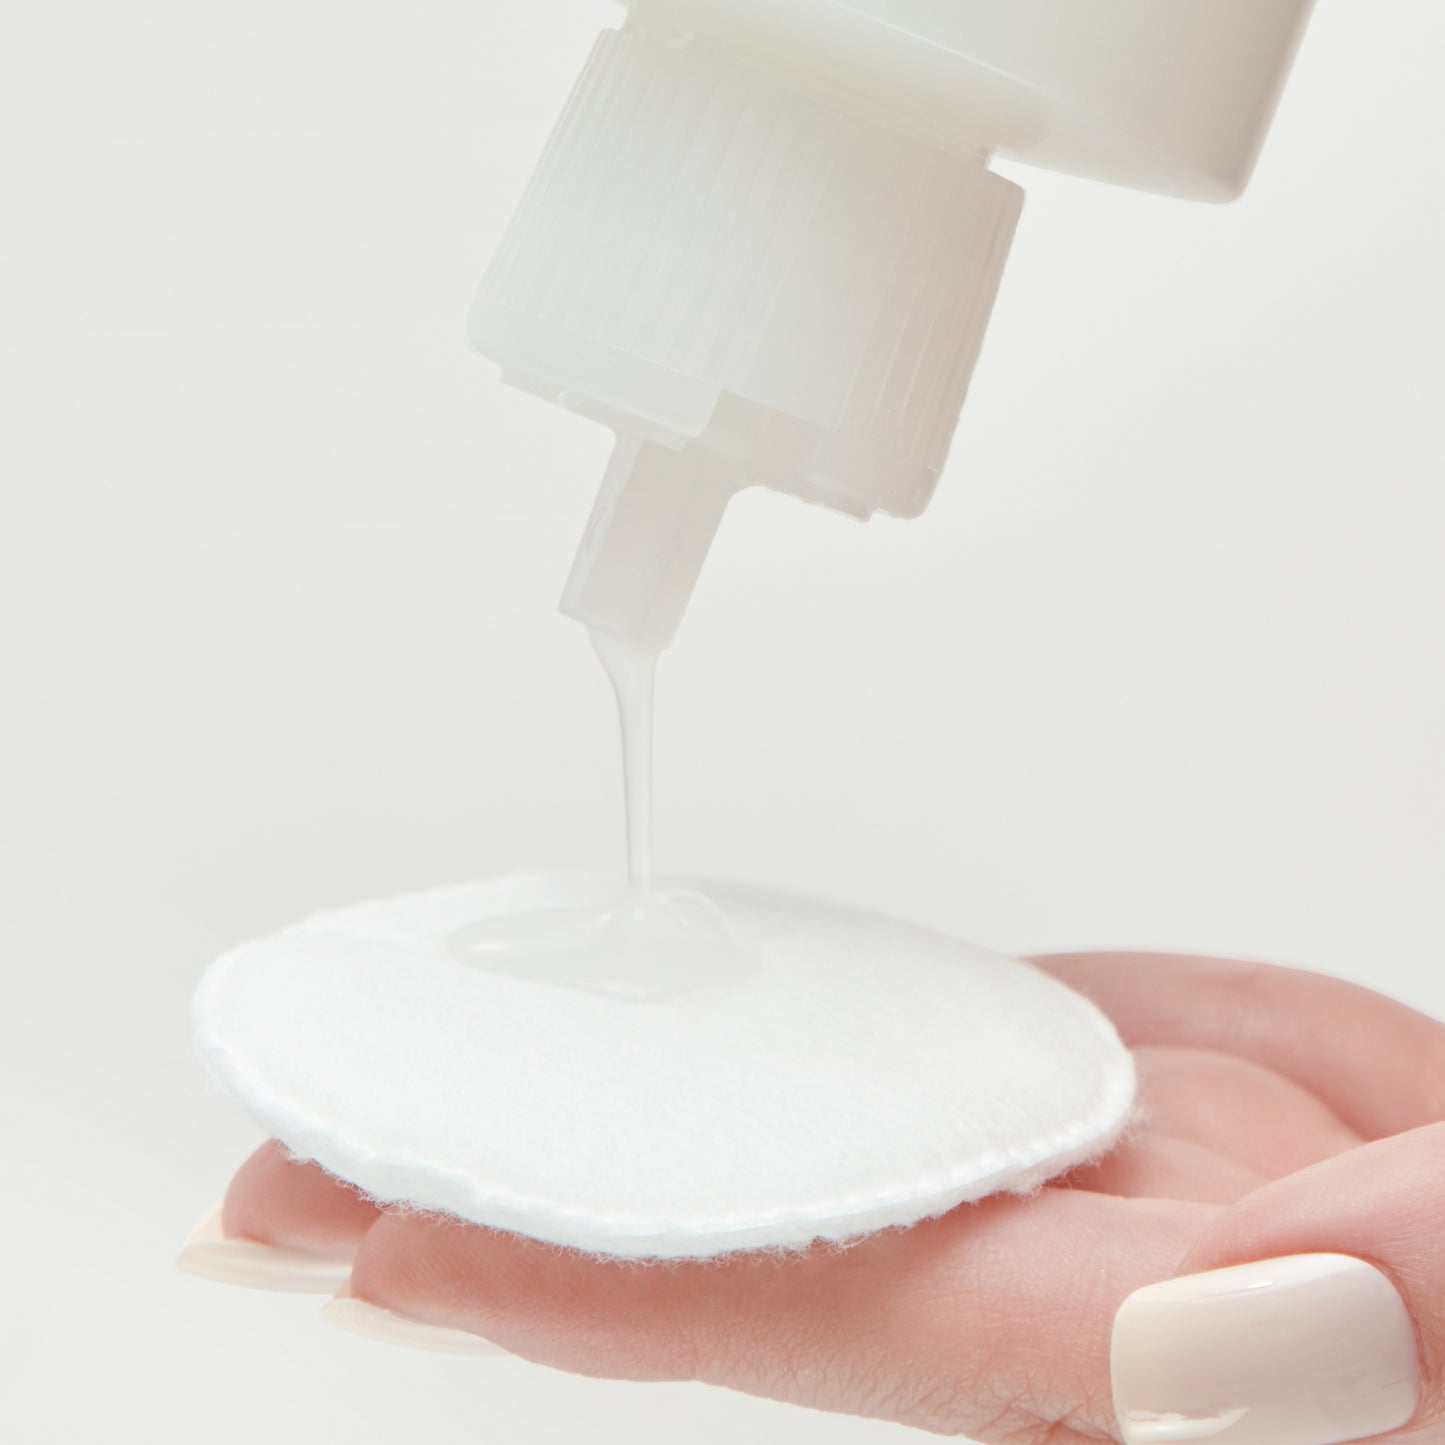  Demonstration showing how to use Hydrating Glow Toner on a cotton pad 